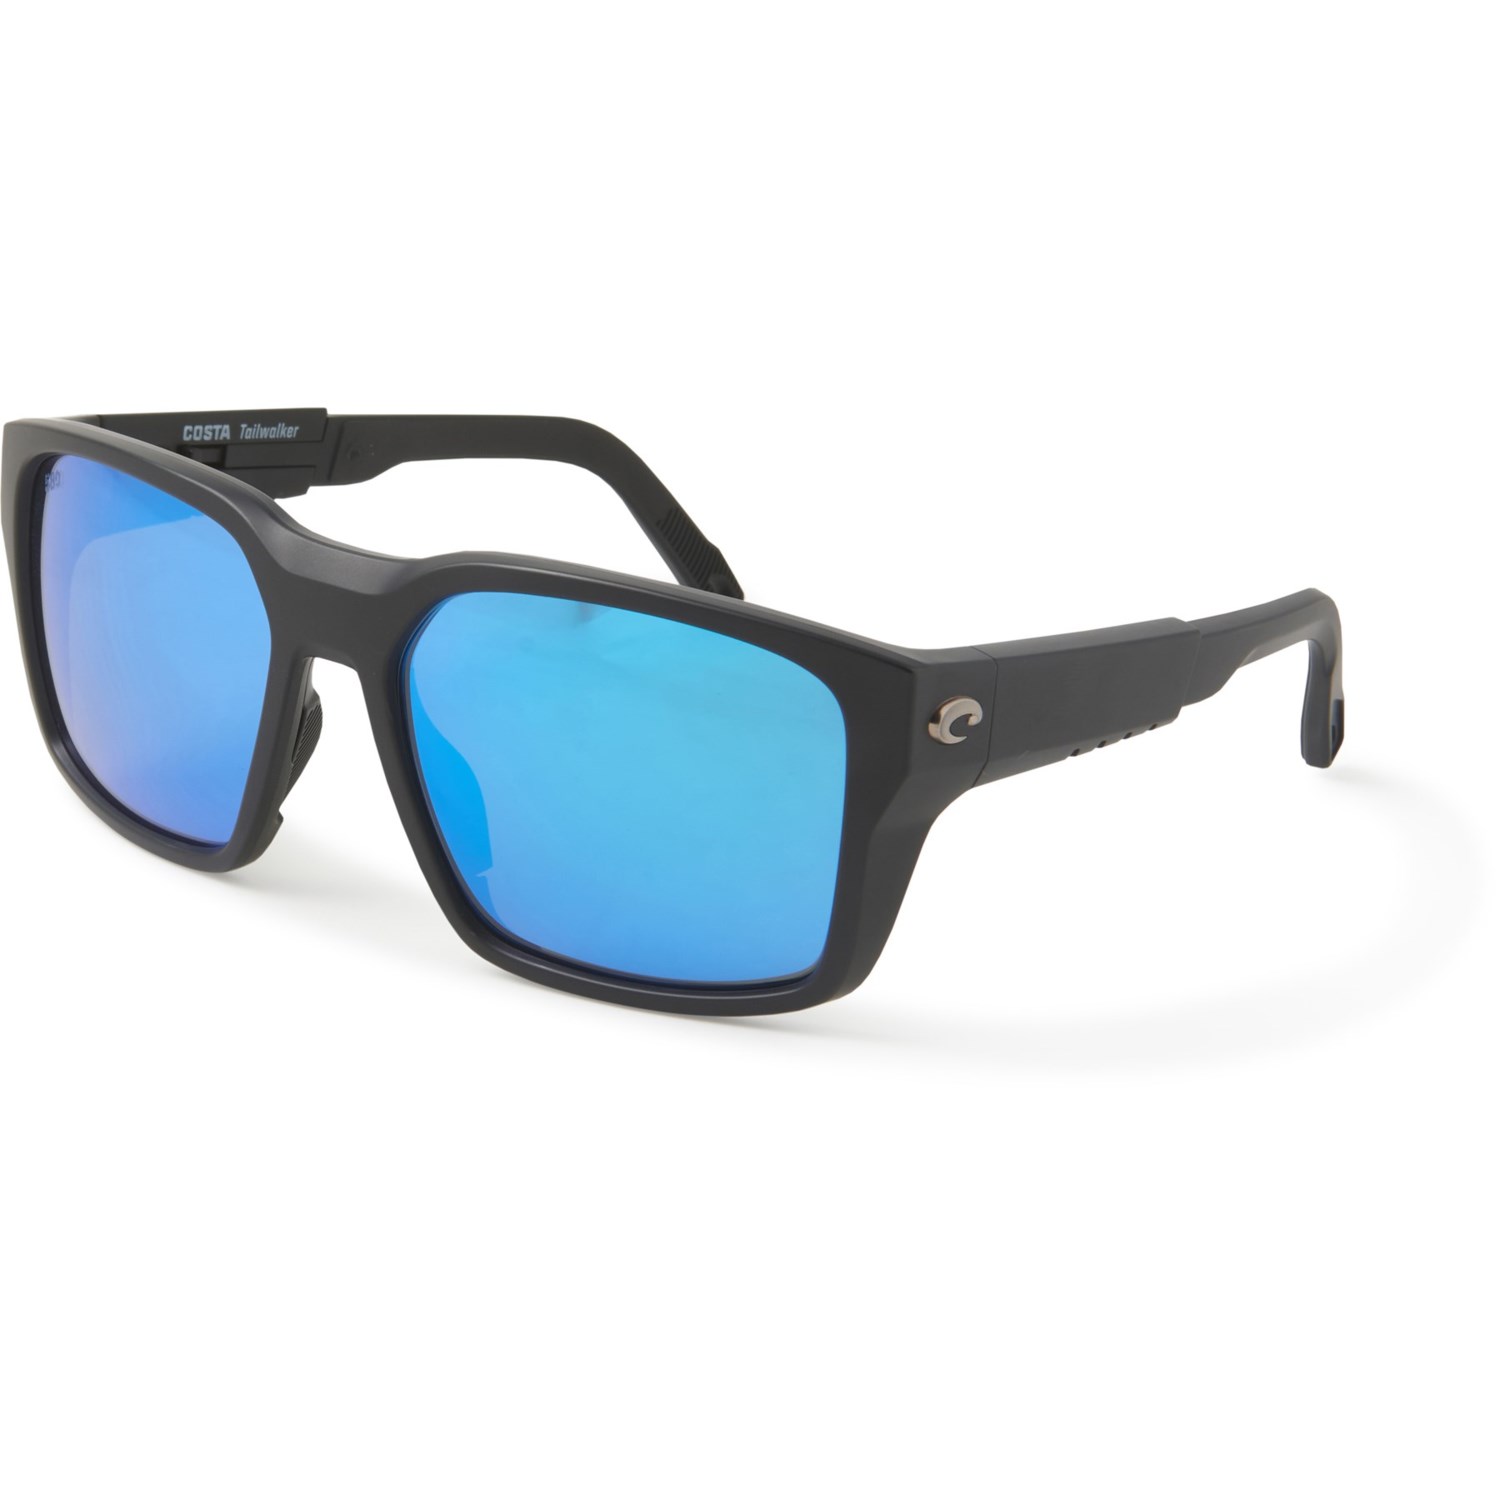 Costa Tailwalker Mirror Sunglasses (For Men and Women) - Save 46%